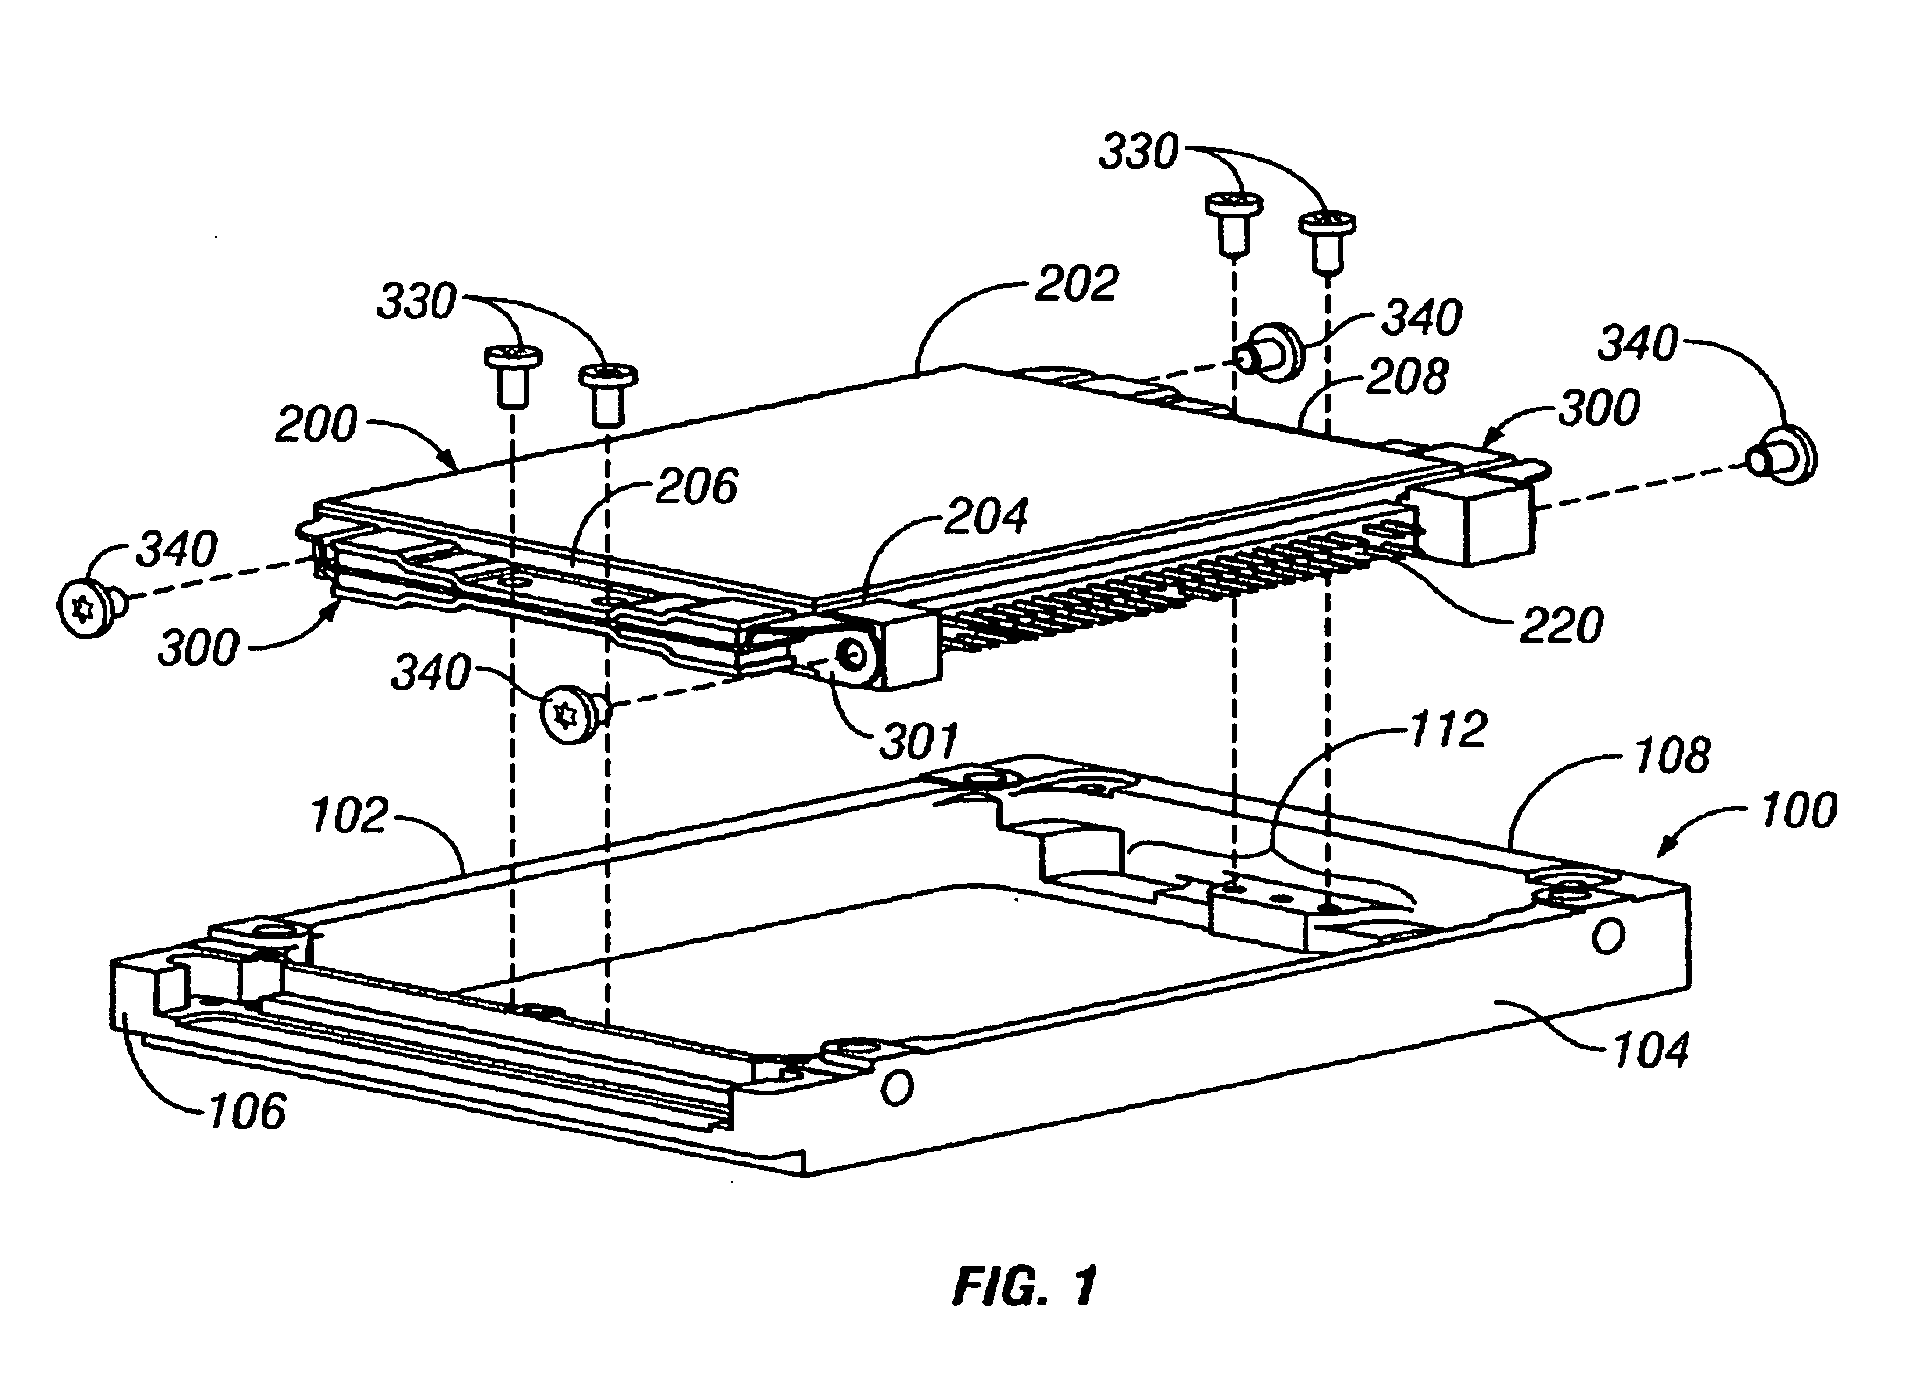 Shock mount assembly for attachment of an electronic device to a support structure